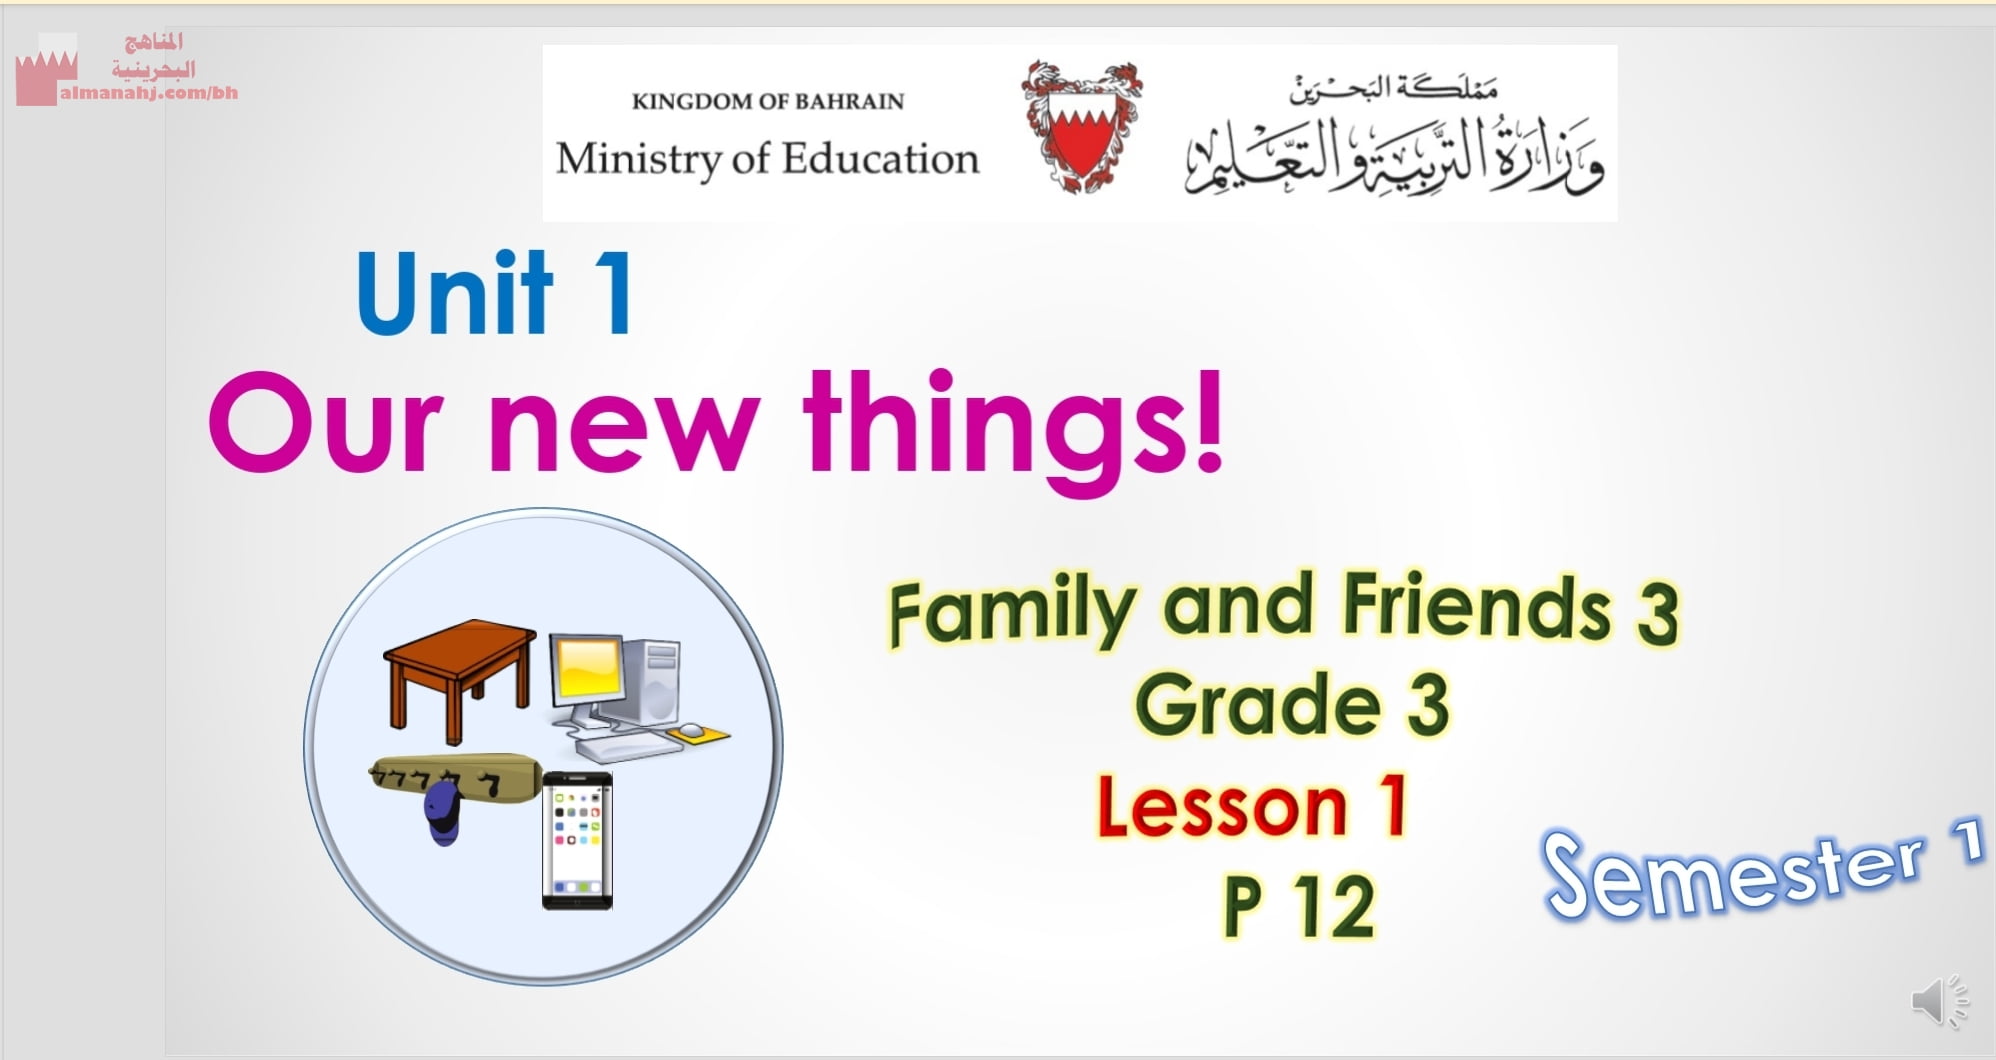 Our new things family and friends lesson 1 PowerPoint presentation